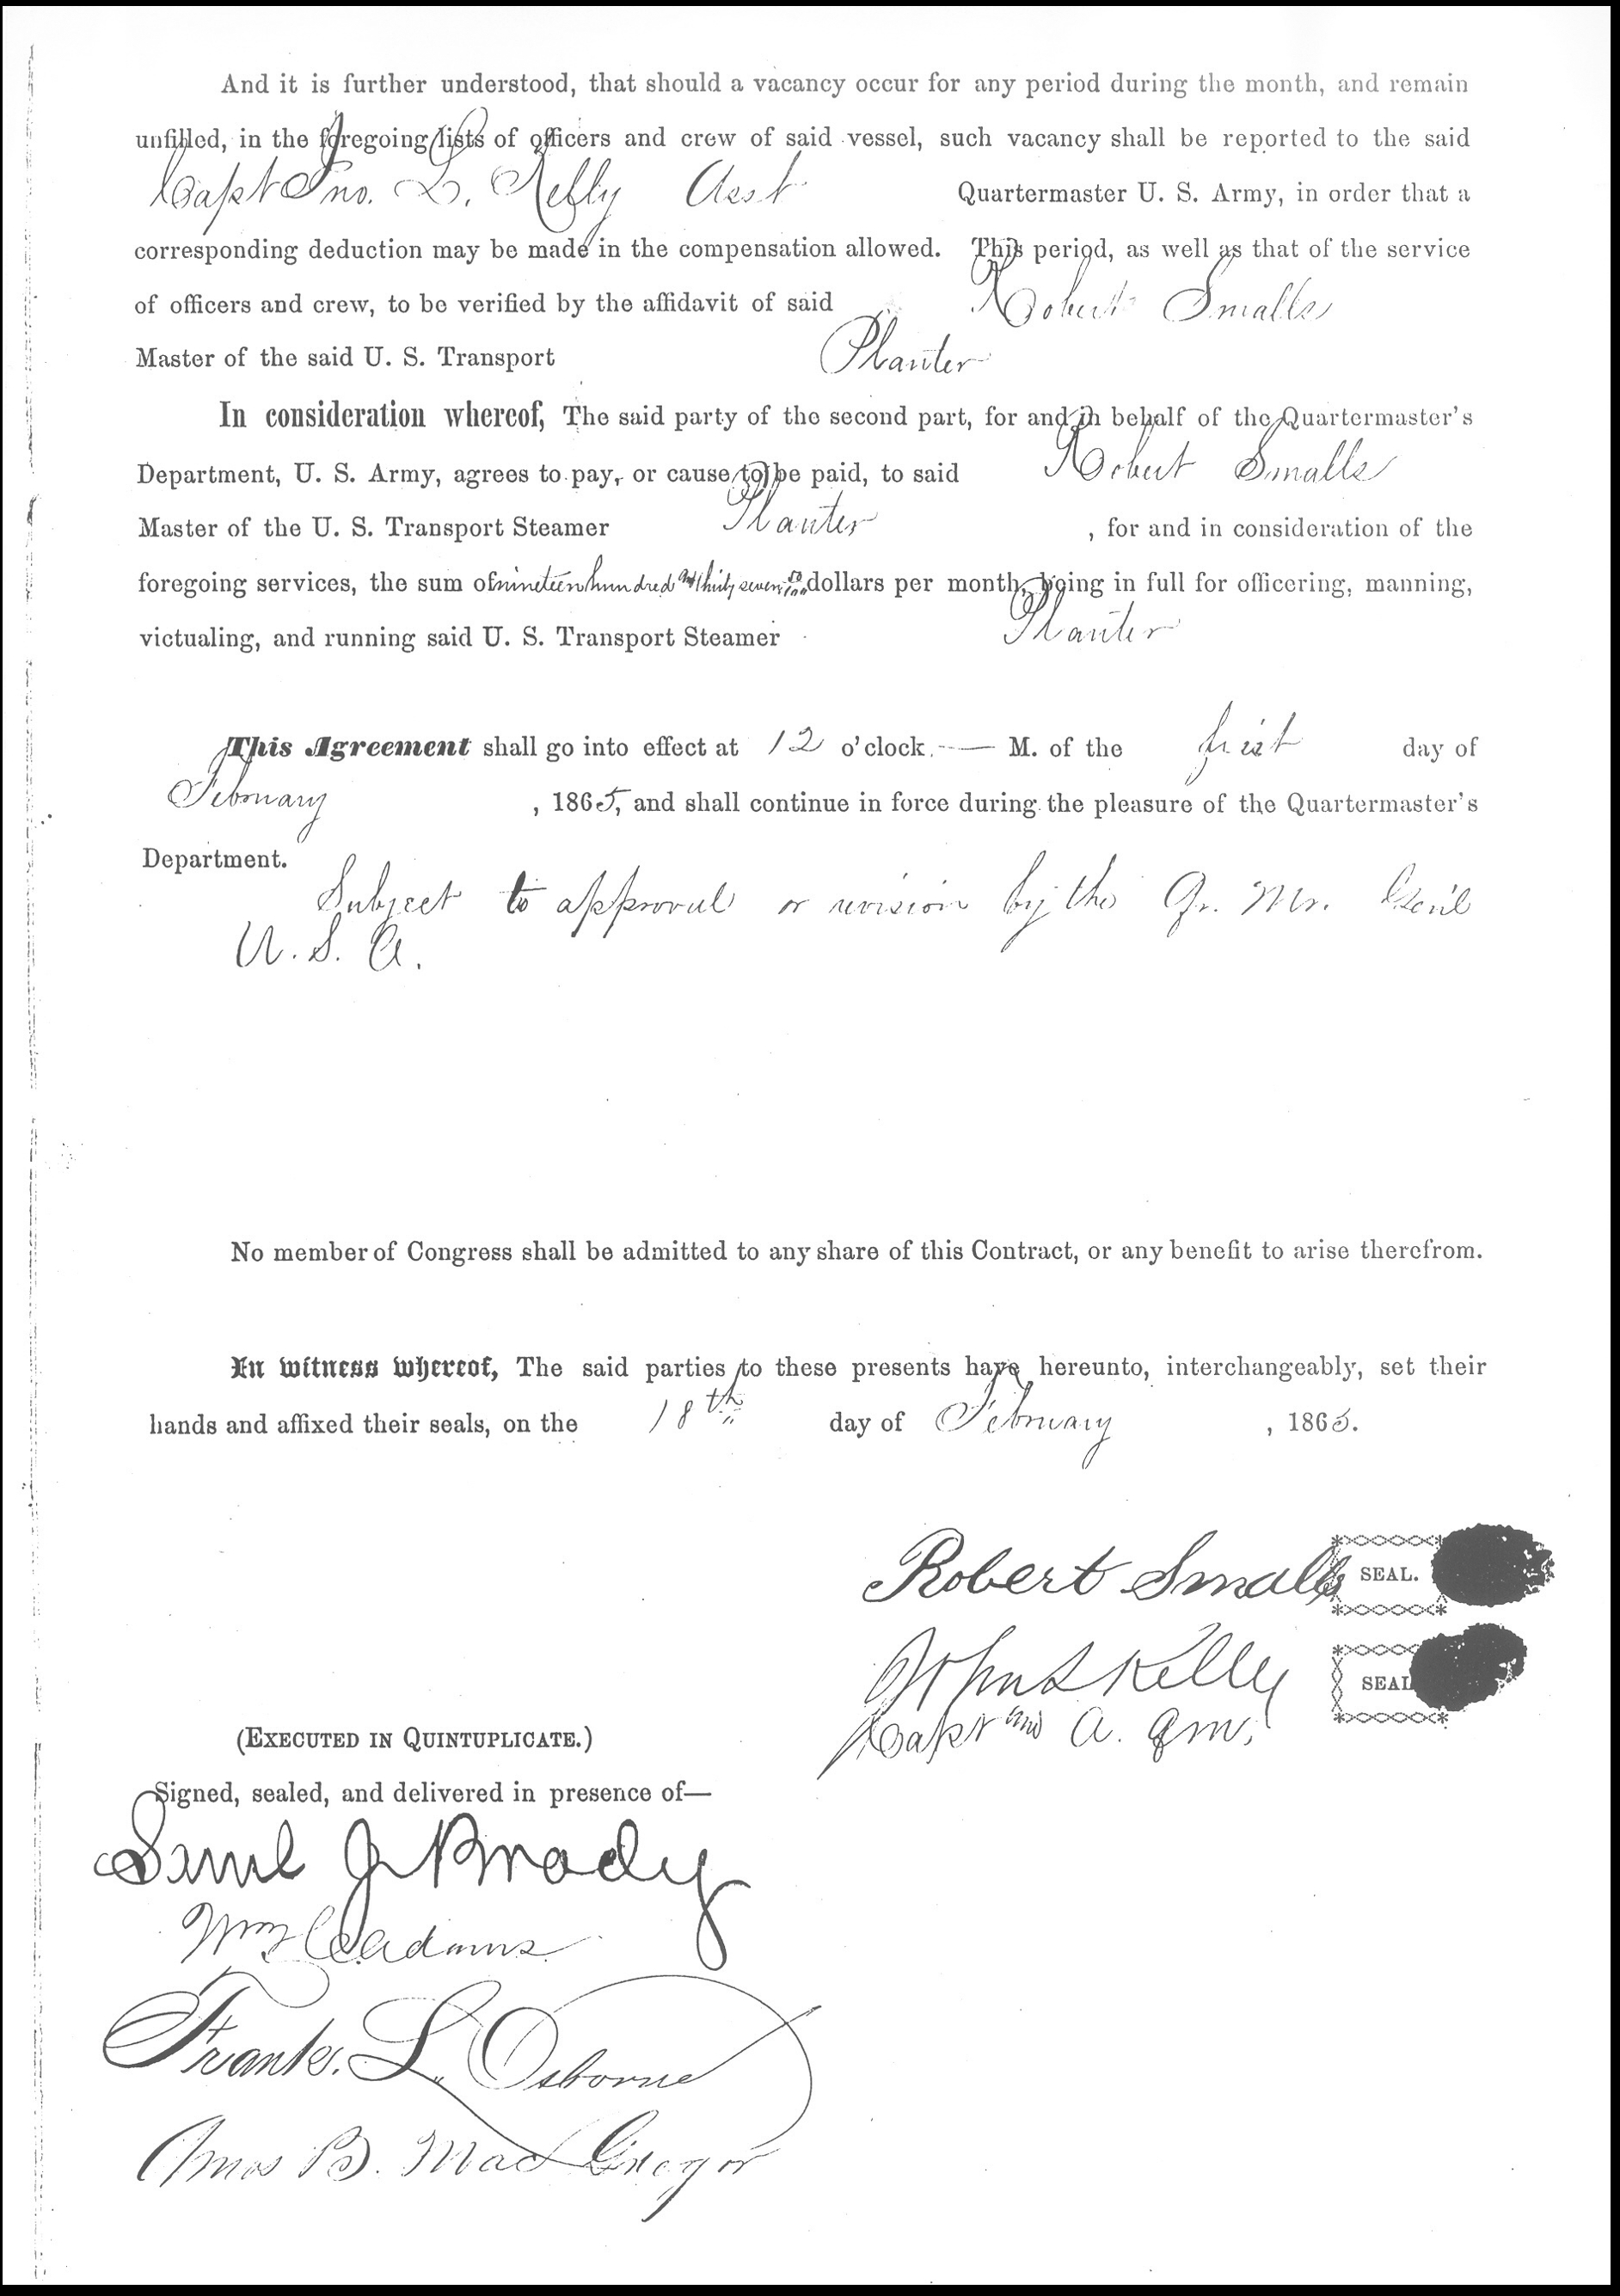 Robert Smalls' contract with the Union as Master of the Planter.